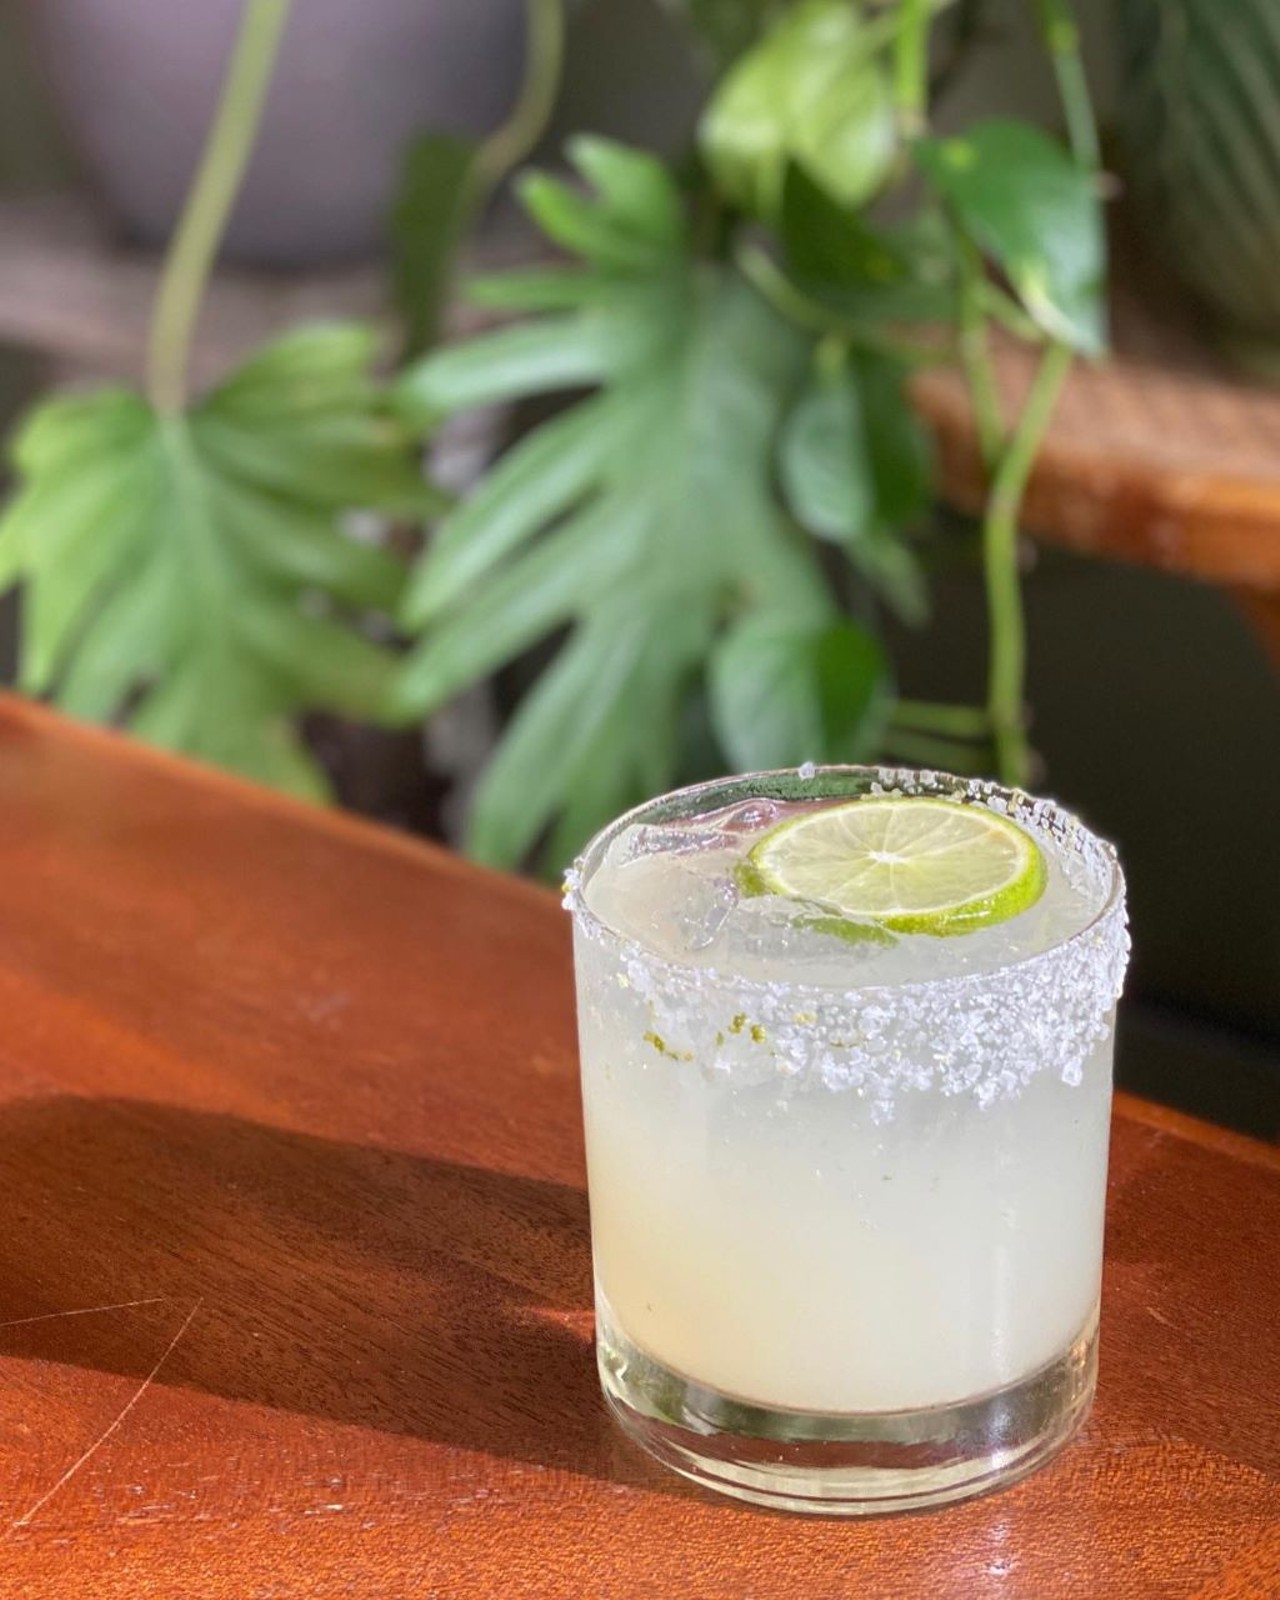 Reyes Mezcaleria  
821 N. Orange Ave.
Michoac&aacute;n native, Chef Wendy Lopez and the Reyes Mexcaleria team aspire to represent the food, spirit, and culture of Mexico. Enjoy a margarita surrounded by their vibrant decor. 
